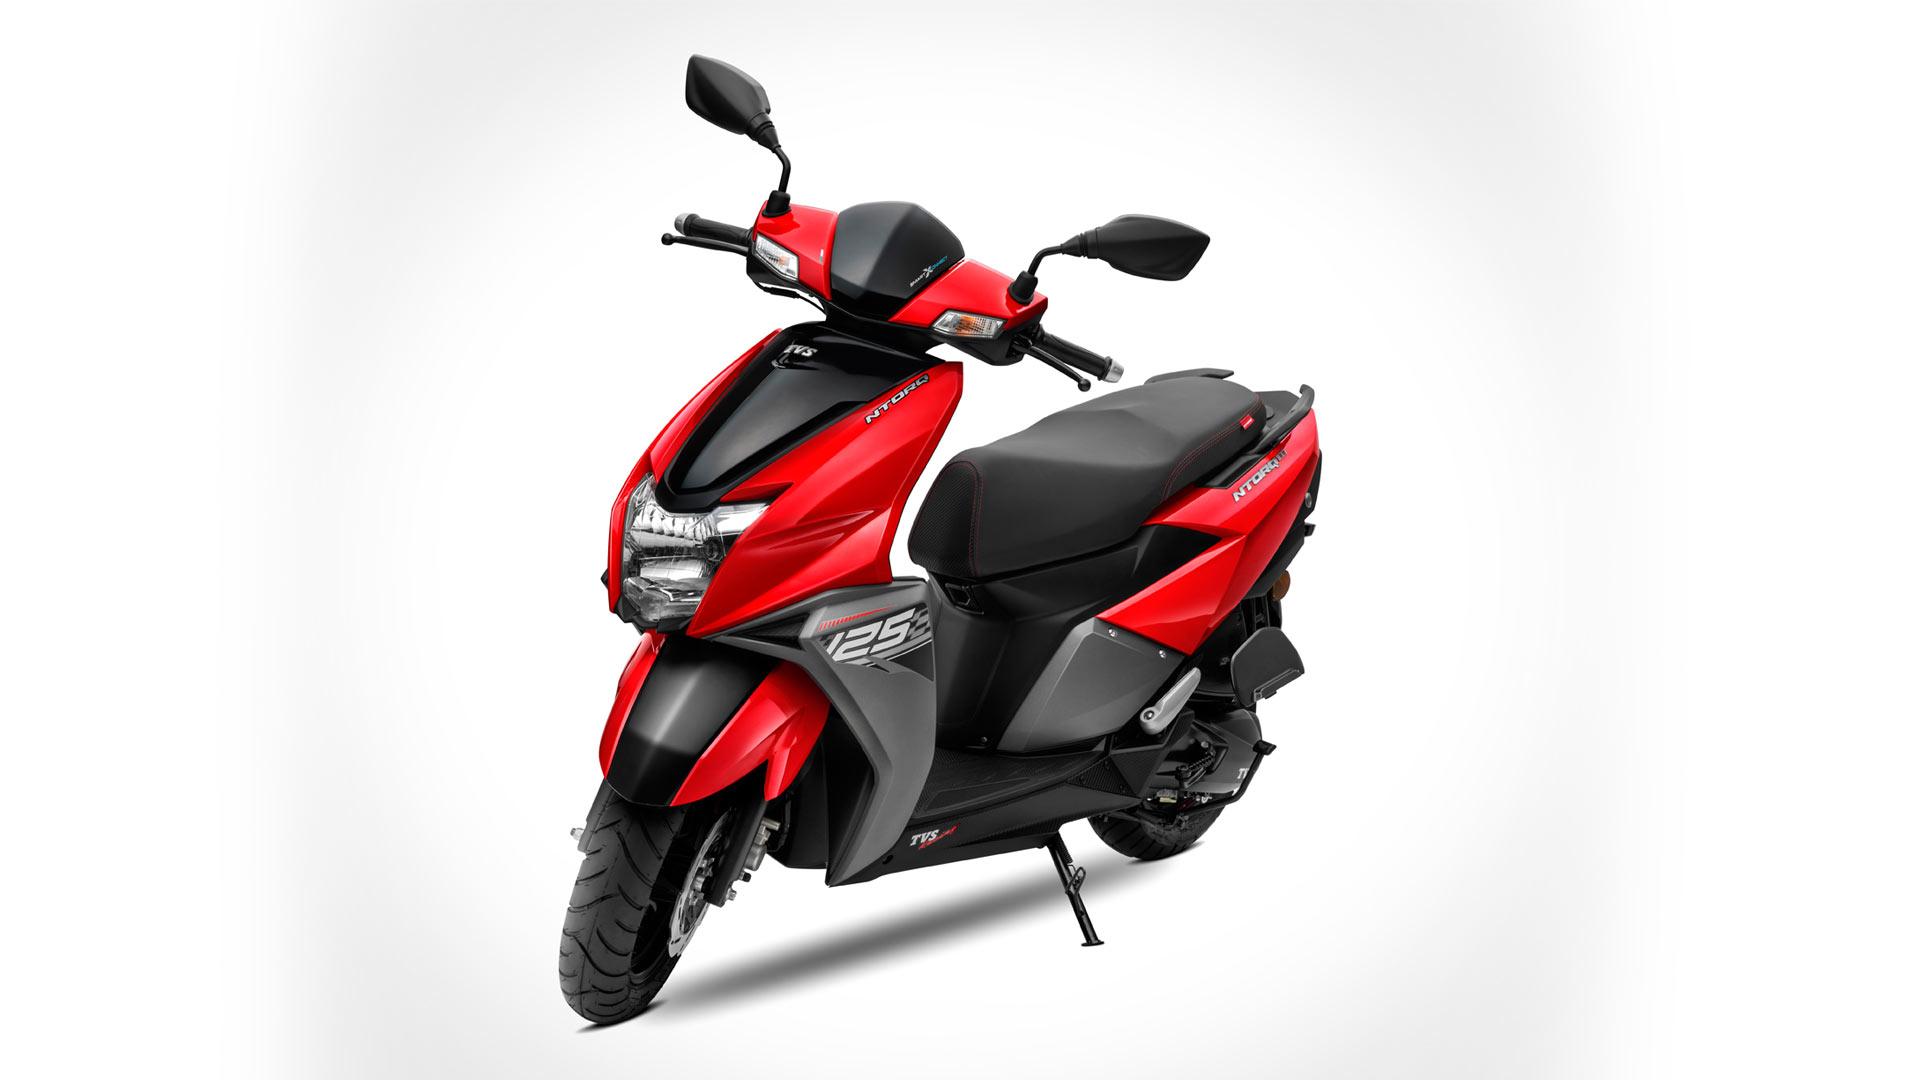 TVS Ntorq 125 crosses 1 lakh sales, now available in Metallic Red